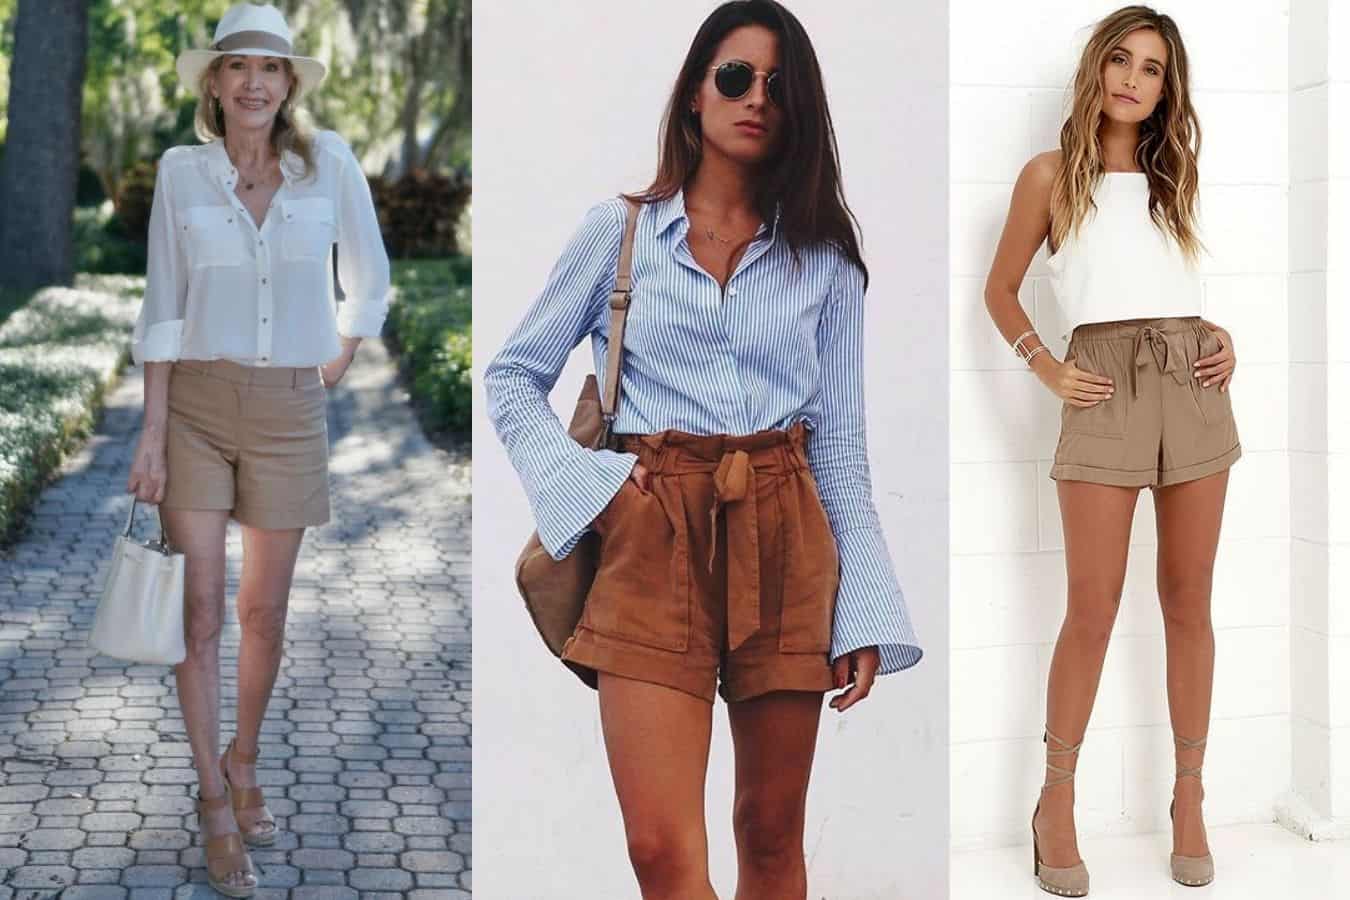 What Color Shirt Goes With Brown Shorts?